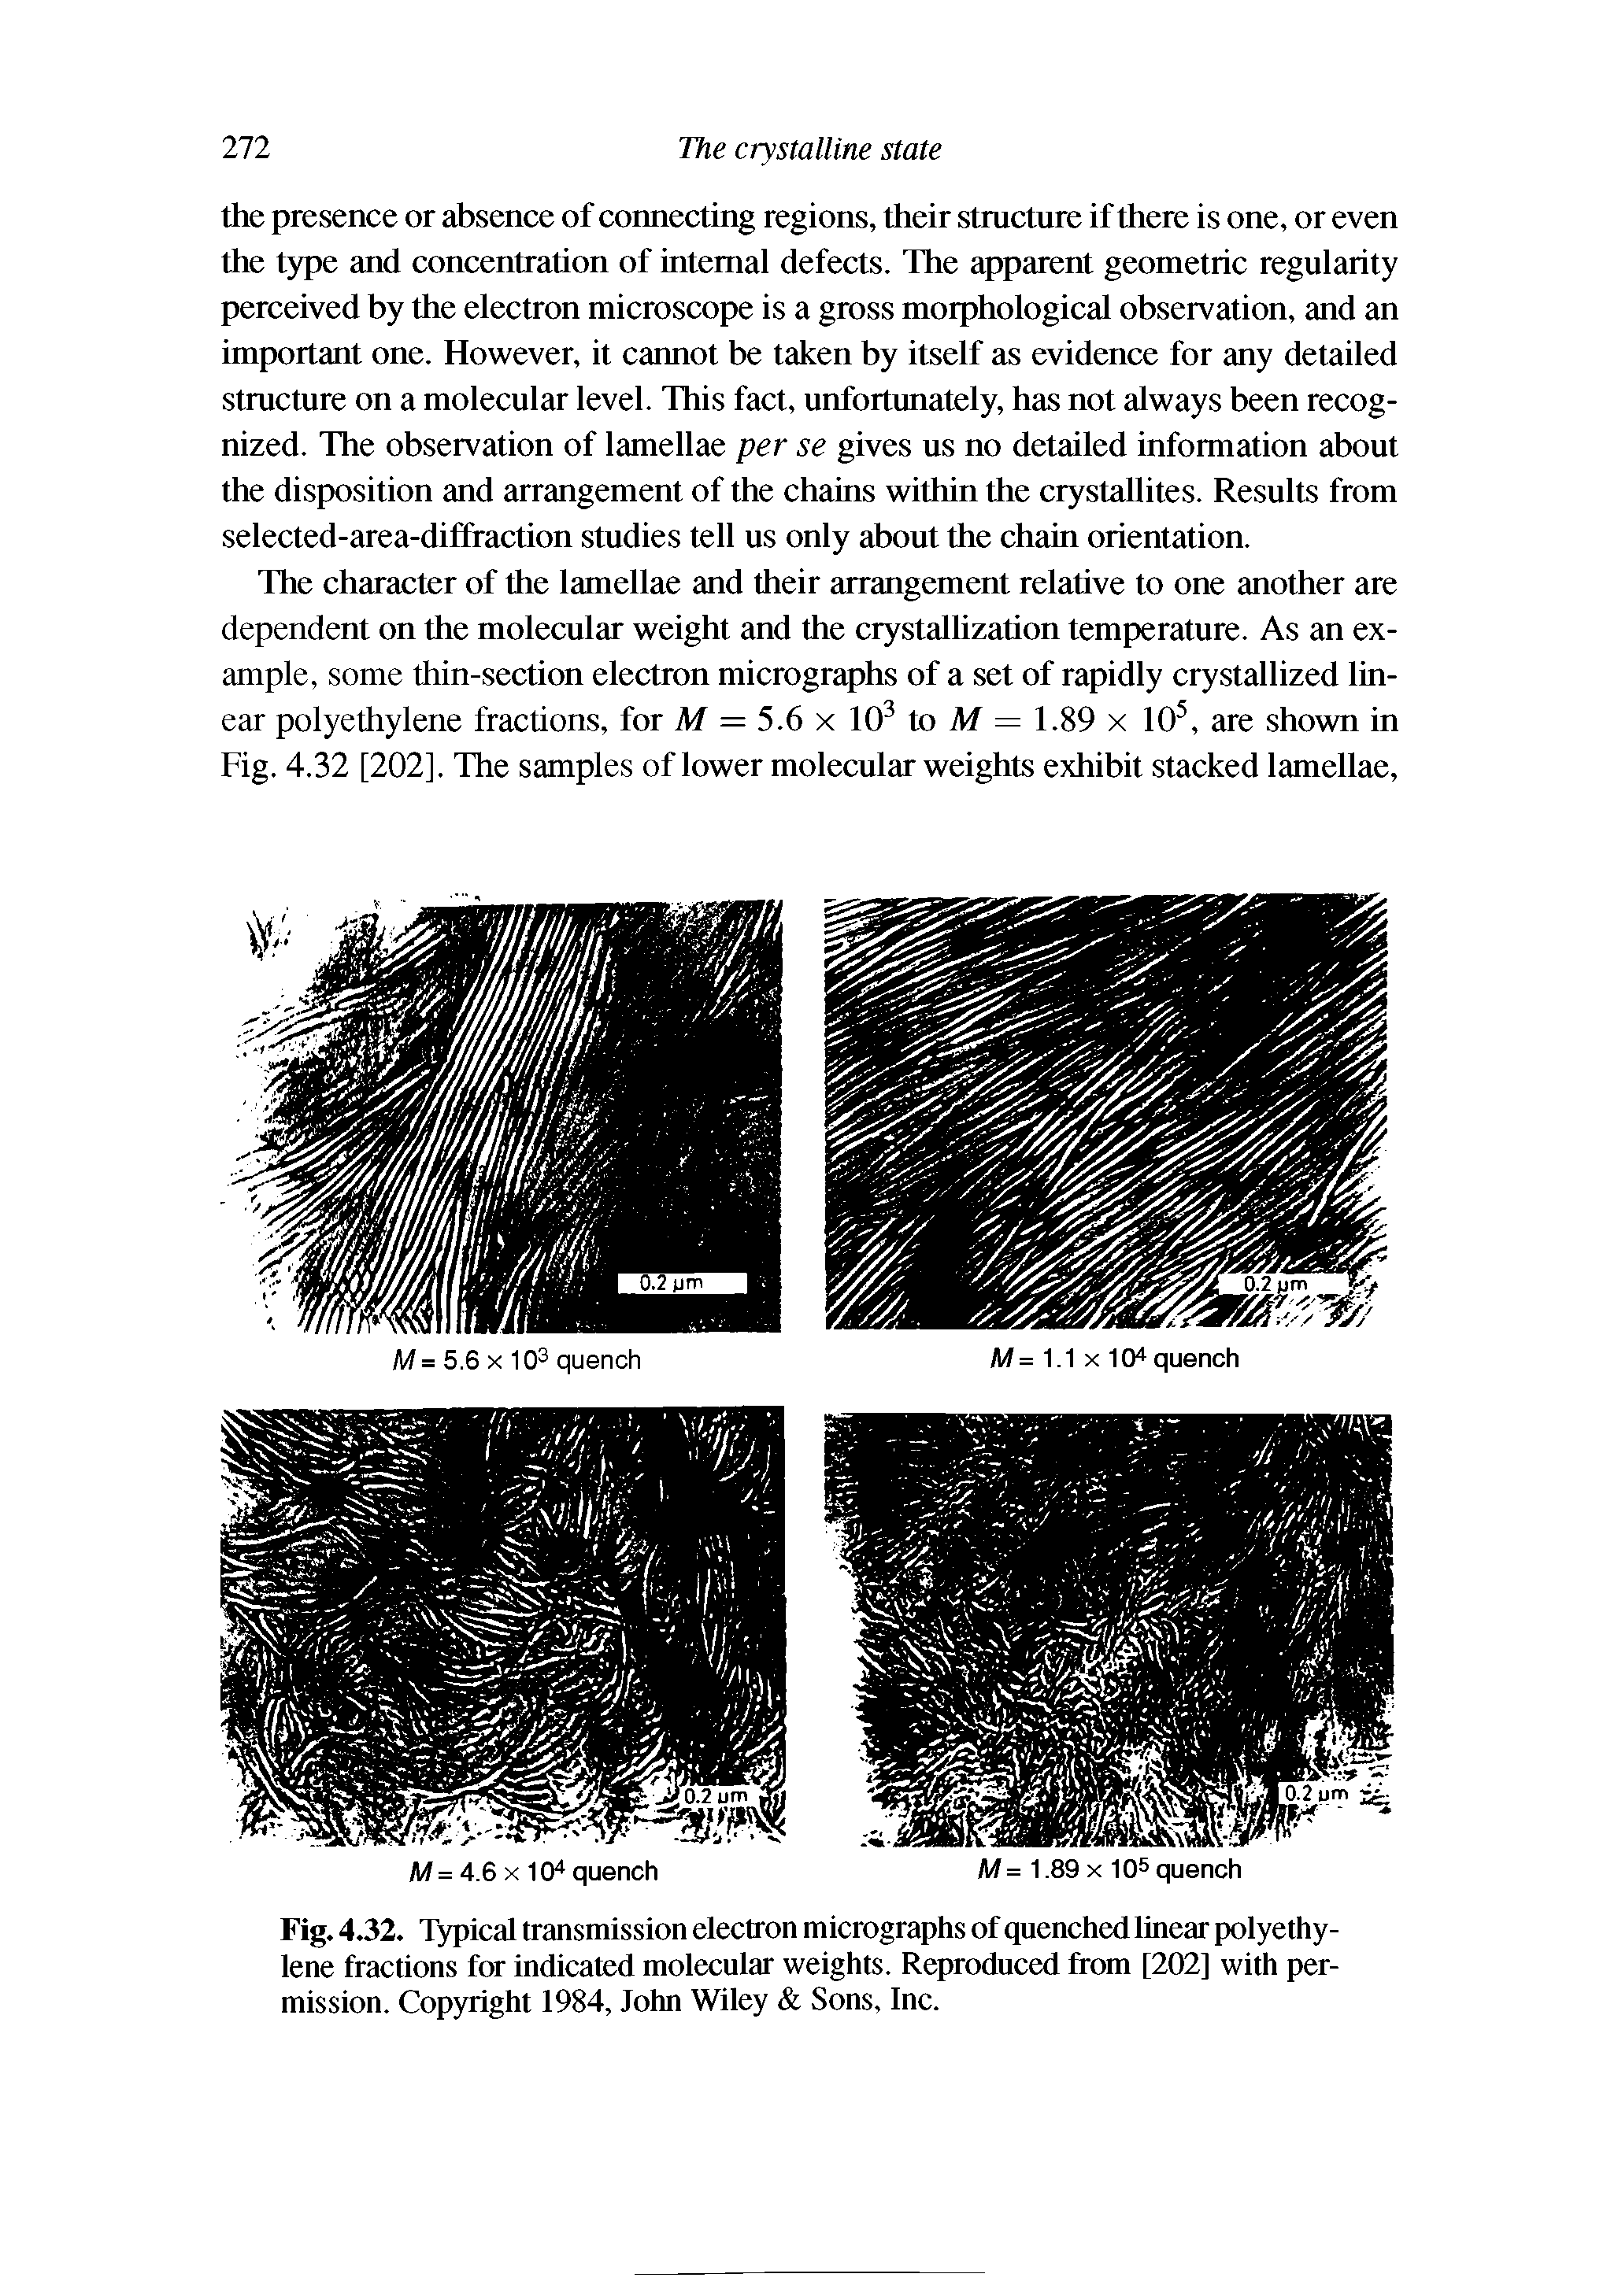 Fig. 4.32. Typical transmission electron micrographs of quenched linear polyethylene fractions for indicated molecular weights. Reproduced from [202] with permission. Copyright 1984, John Wiley Sons, Inc.